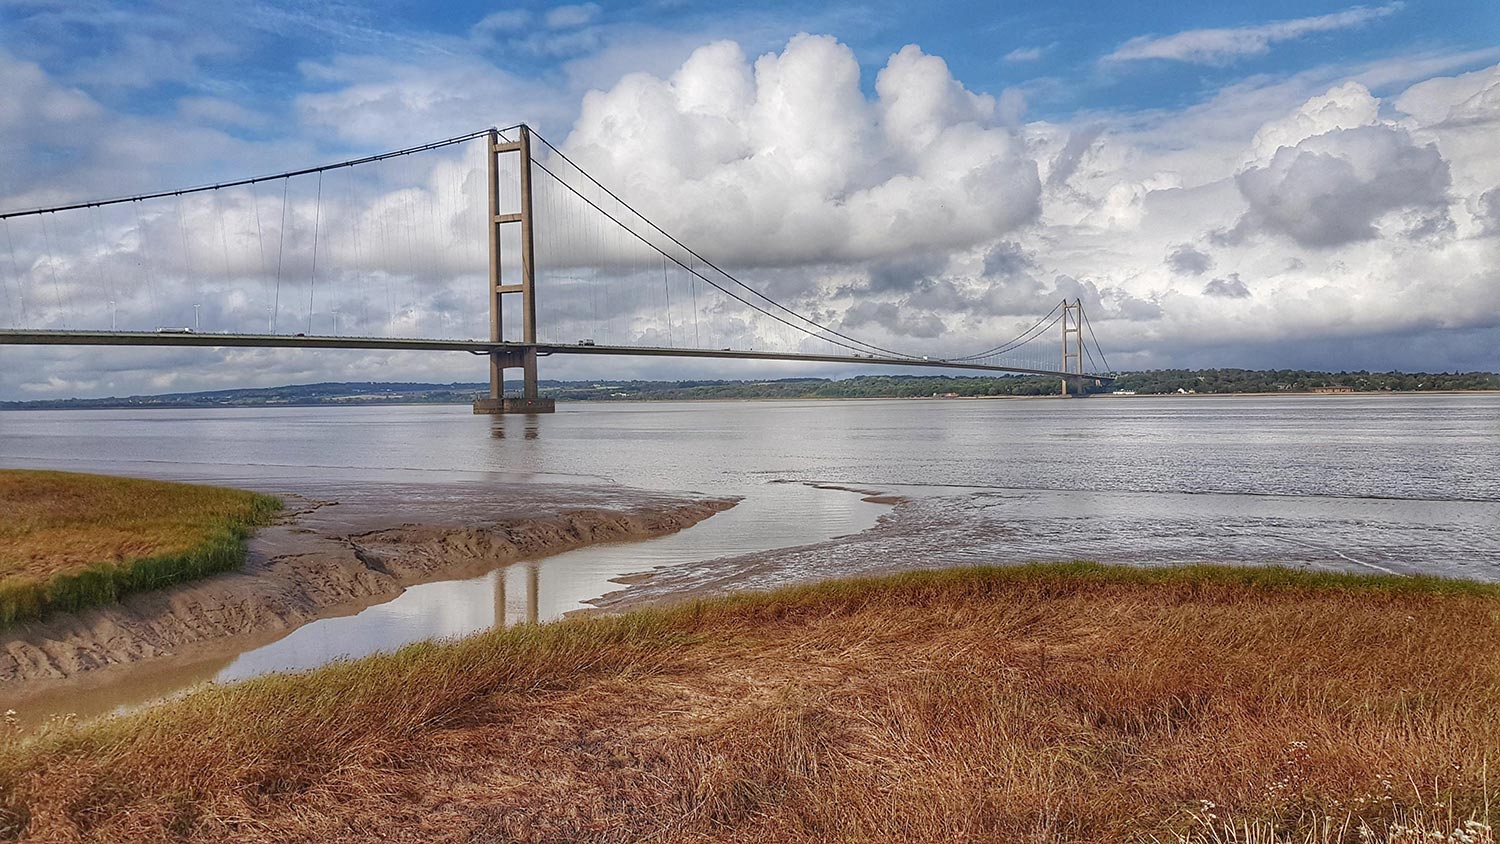 View of the Humber Bridge, stretching over the Humber estuary. The sky is filled with dense, billowing clouds; the reeds in the foreground are in Autumnal reds and golds. 